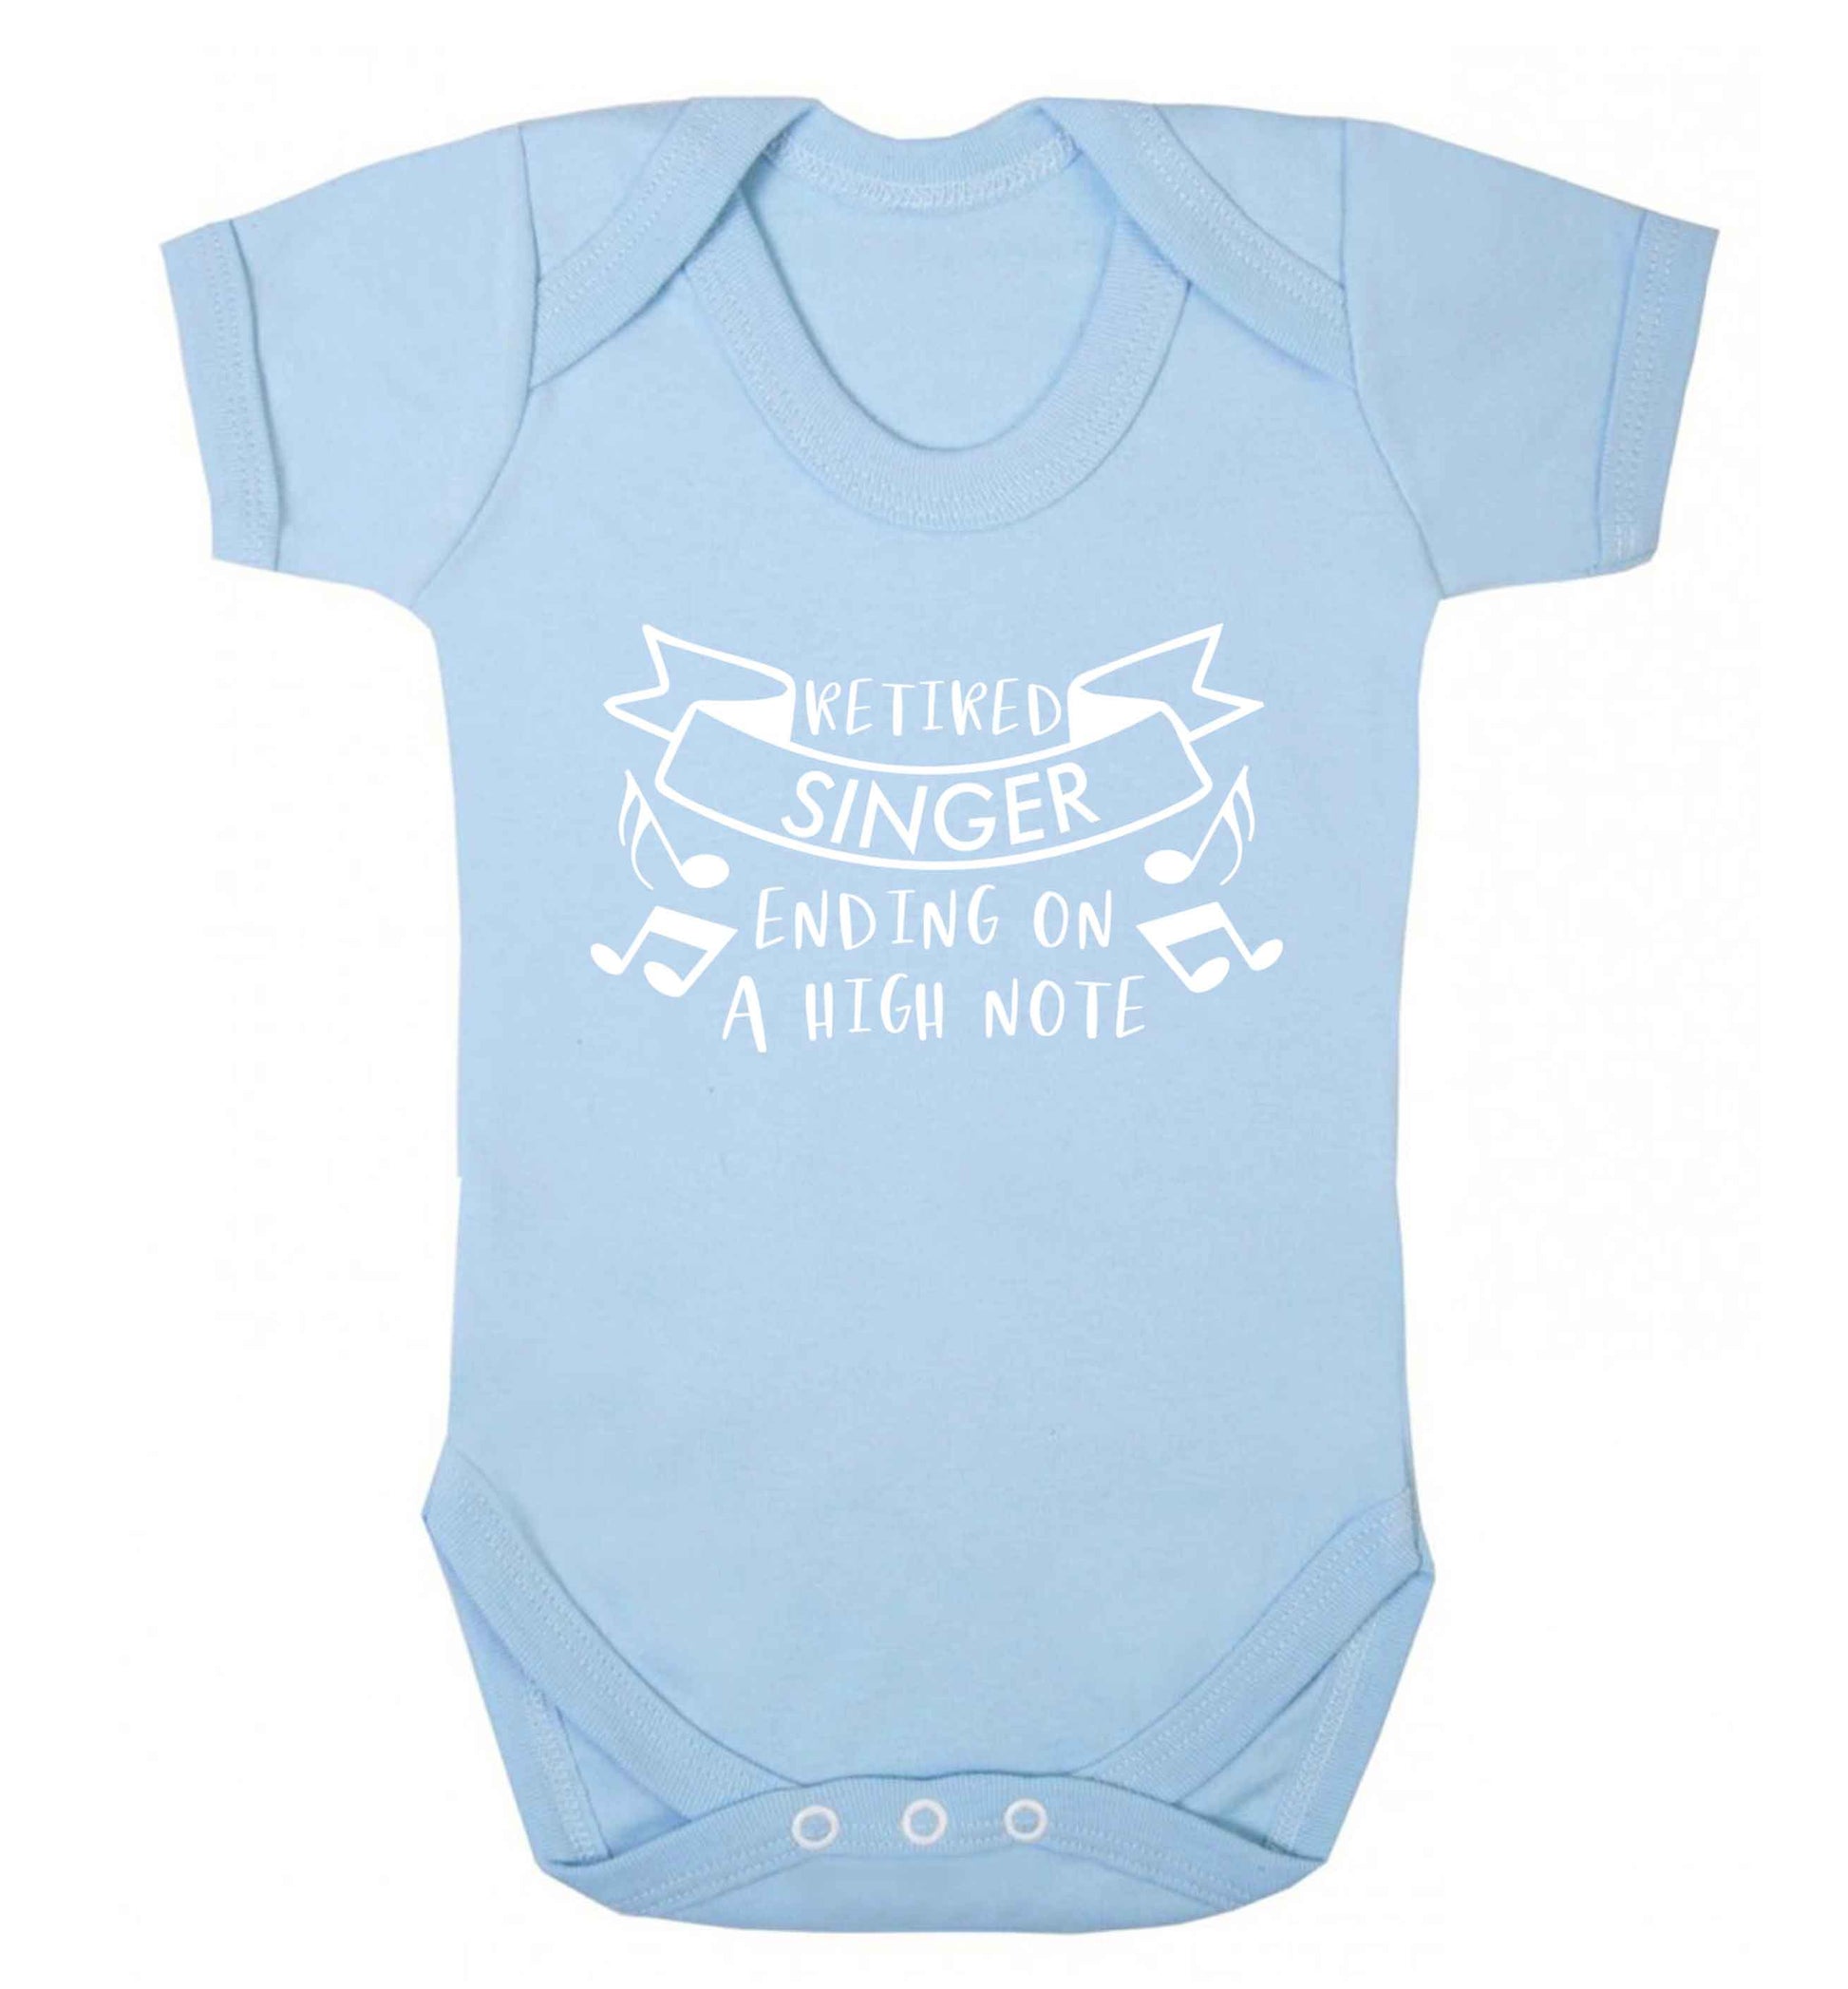 Retired singer ending on a high note Baby Vest pale blue 18-24 months